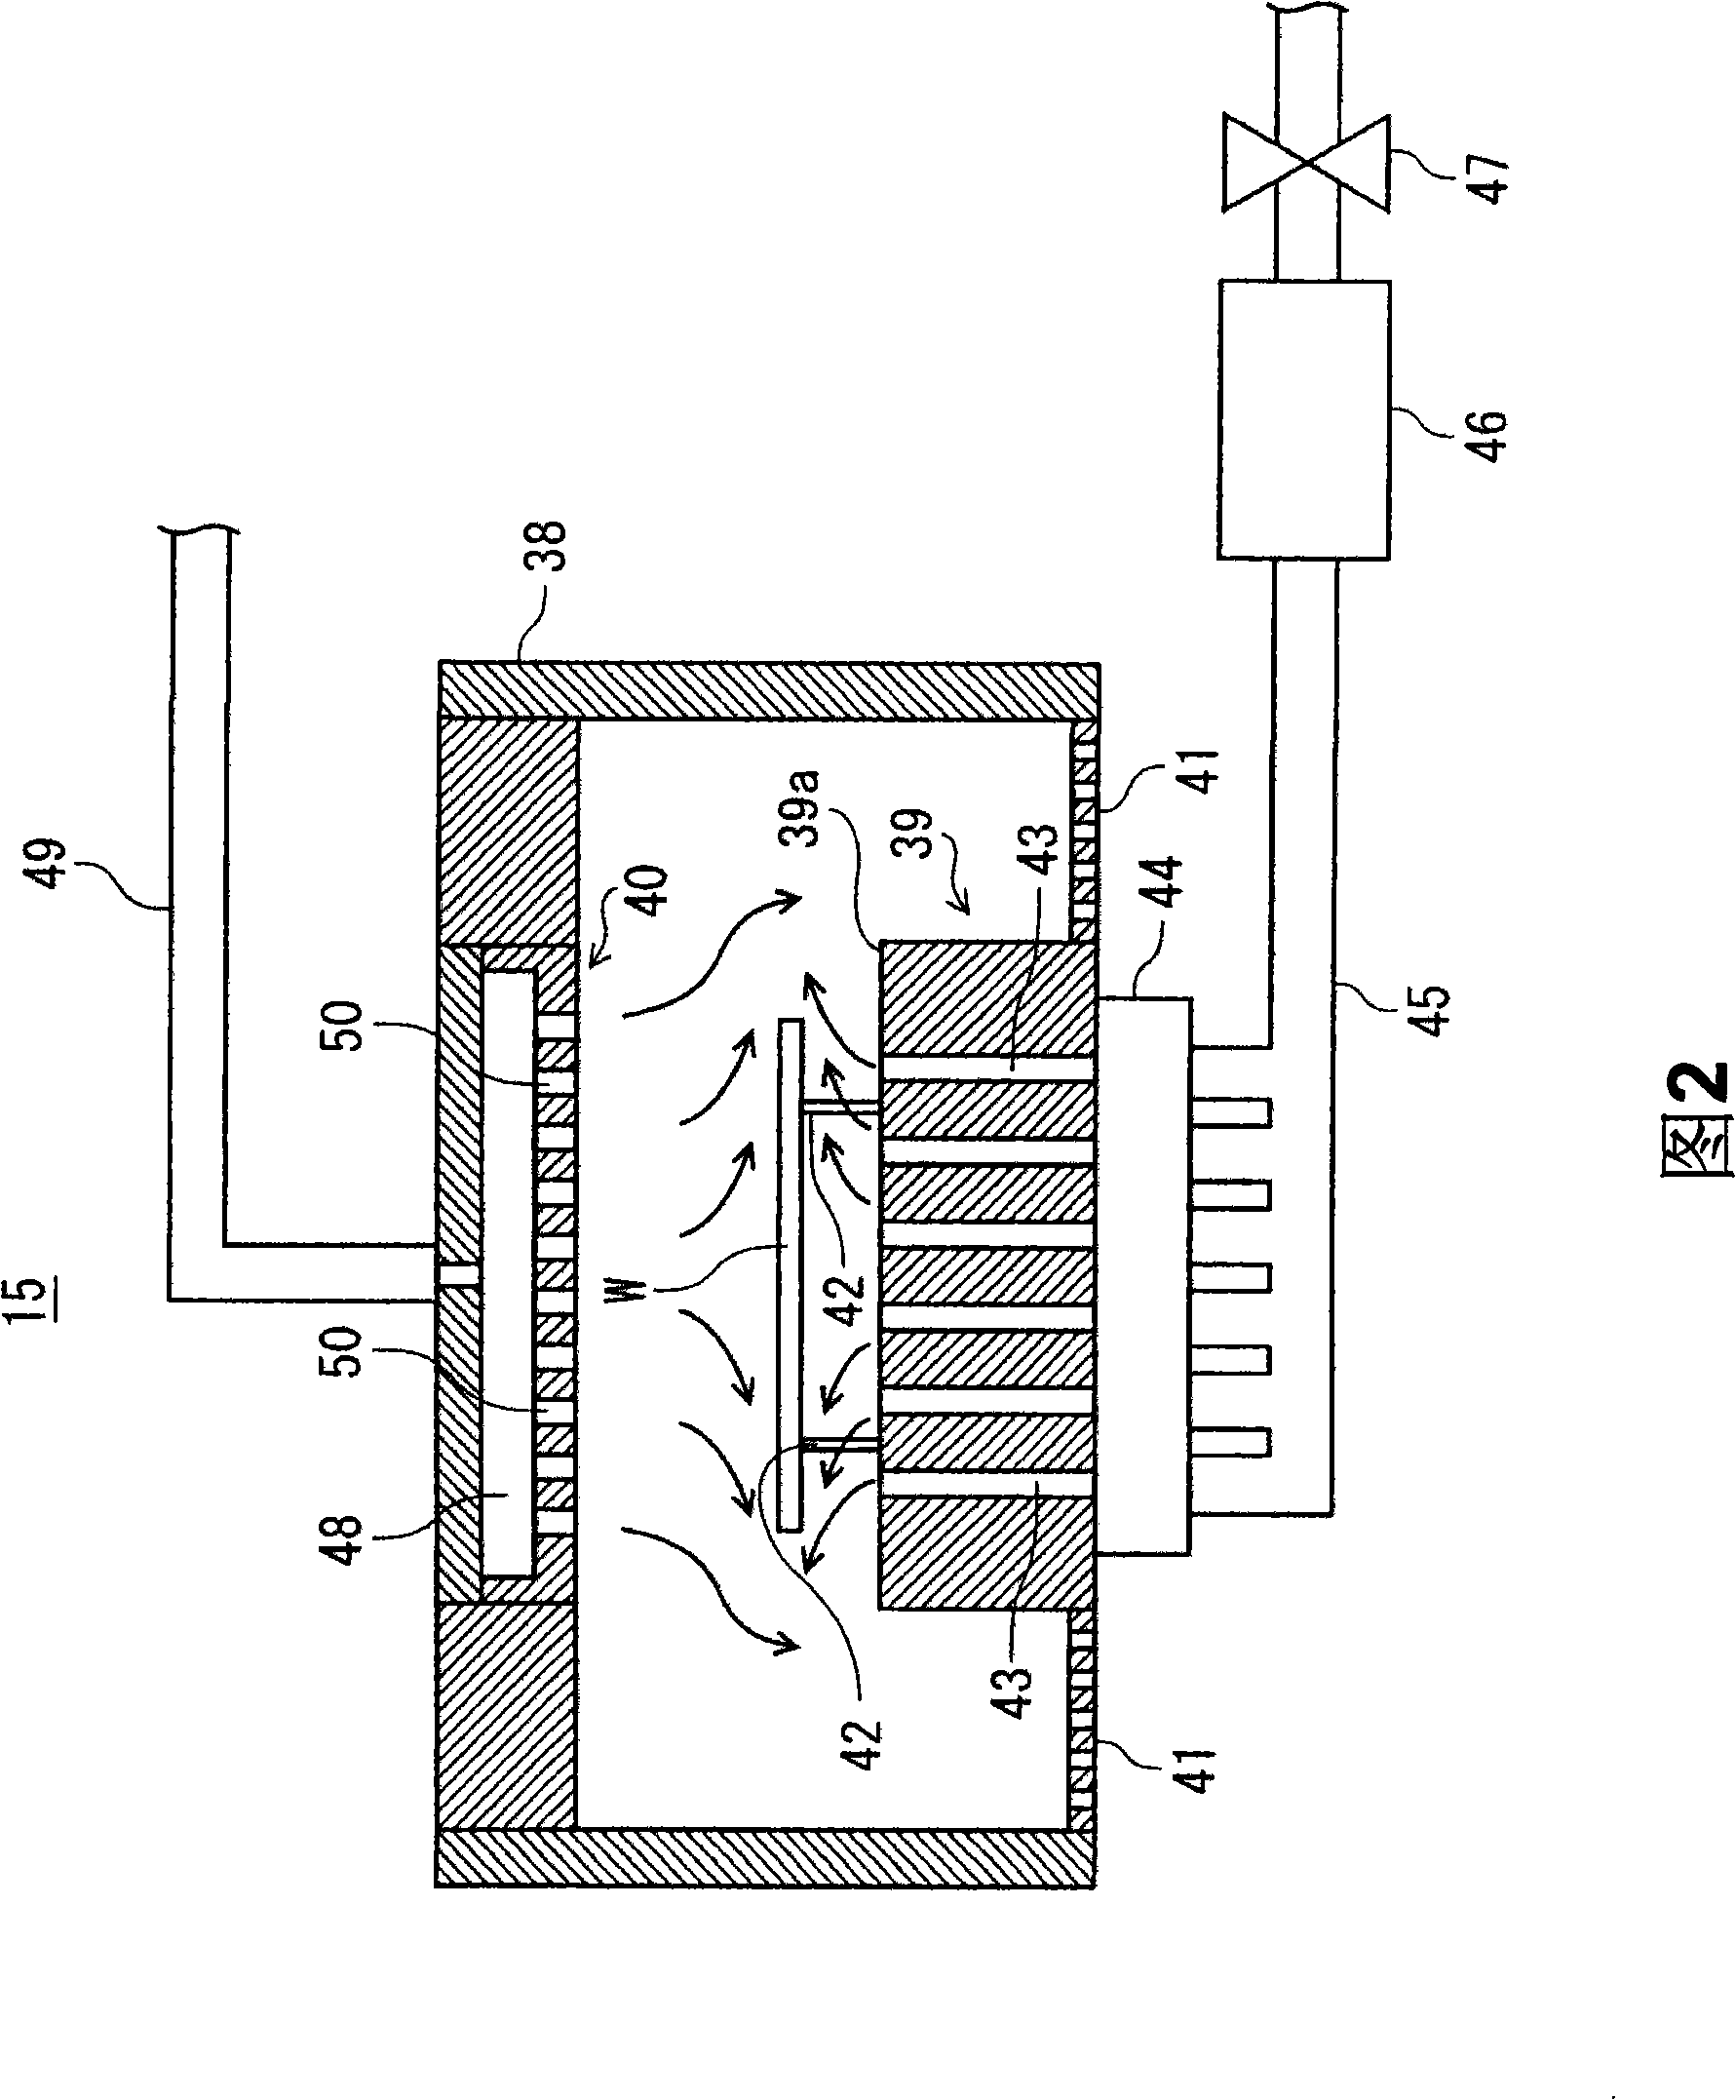 Substrate processing system and substrate cleaning apparatus